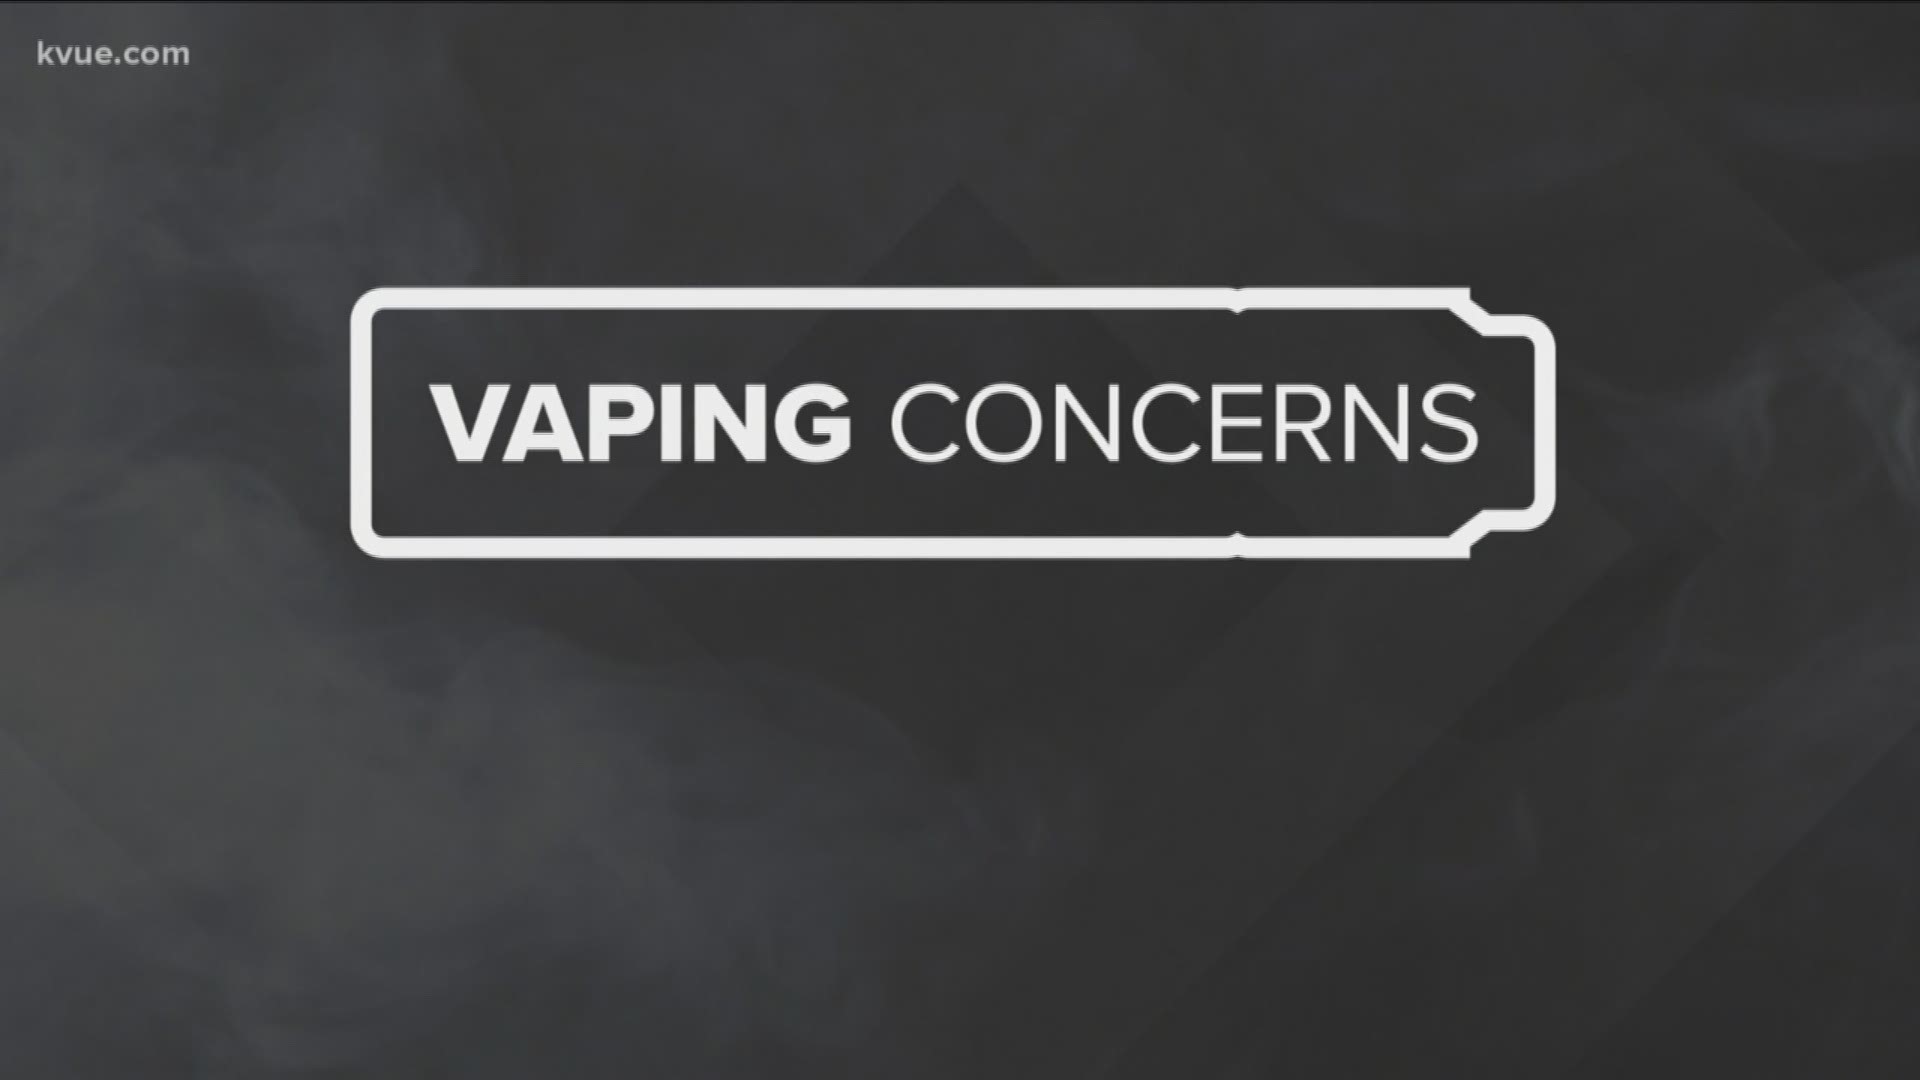 The company said it is discontinuing sales "due to the unknown health implications of vaping."